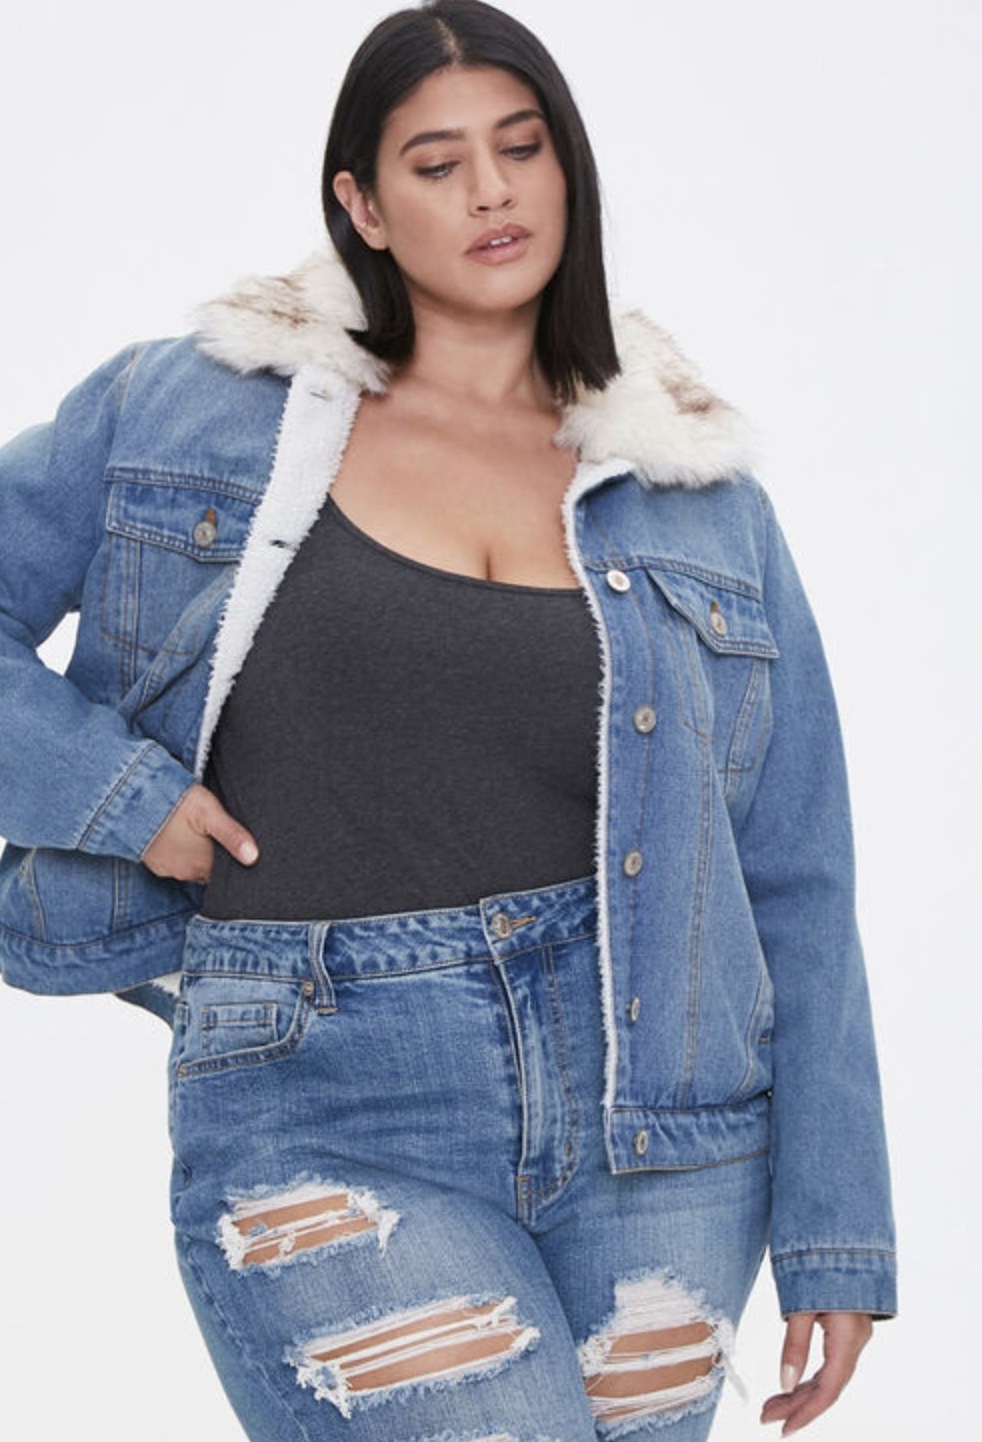 Model is wearing a denim fur trim jacket with blue jeans and a black top